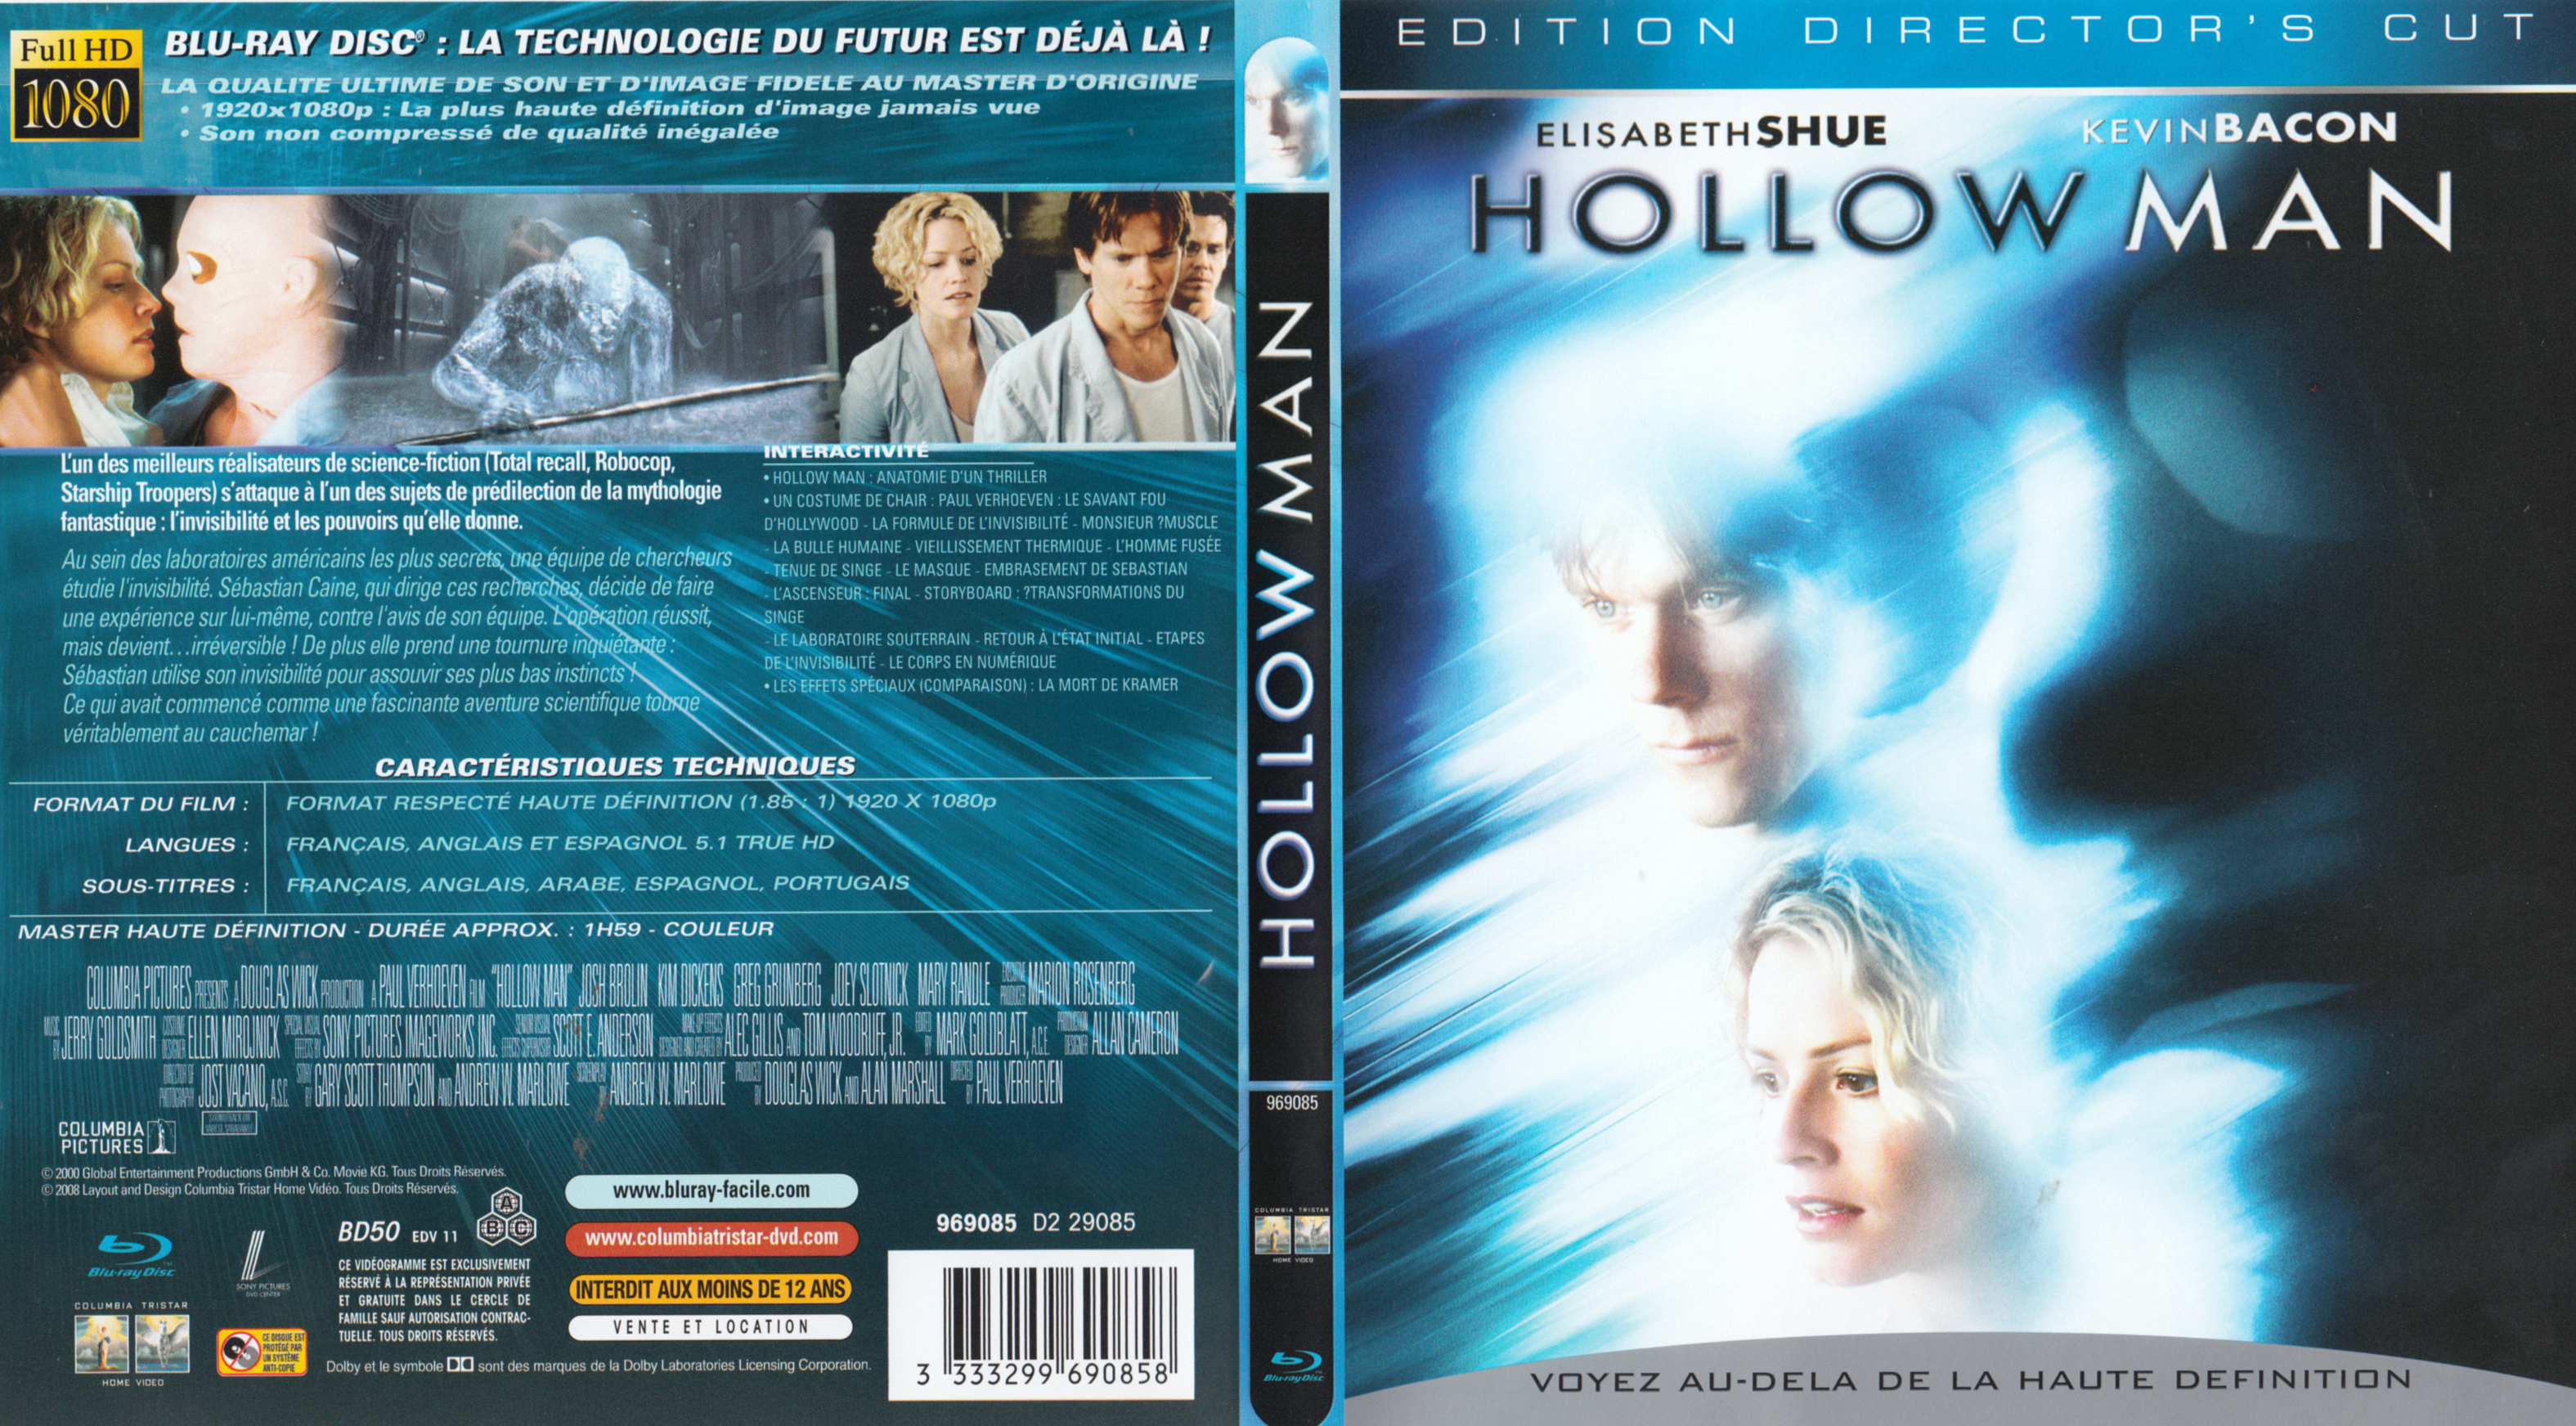 Jaquette DVD Hollow Man (BLU-RAY)